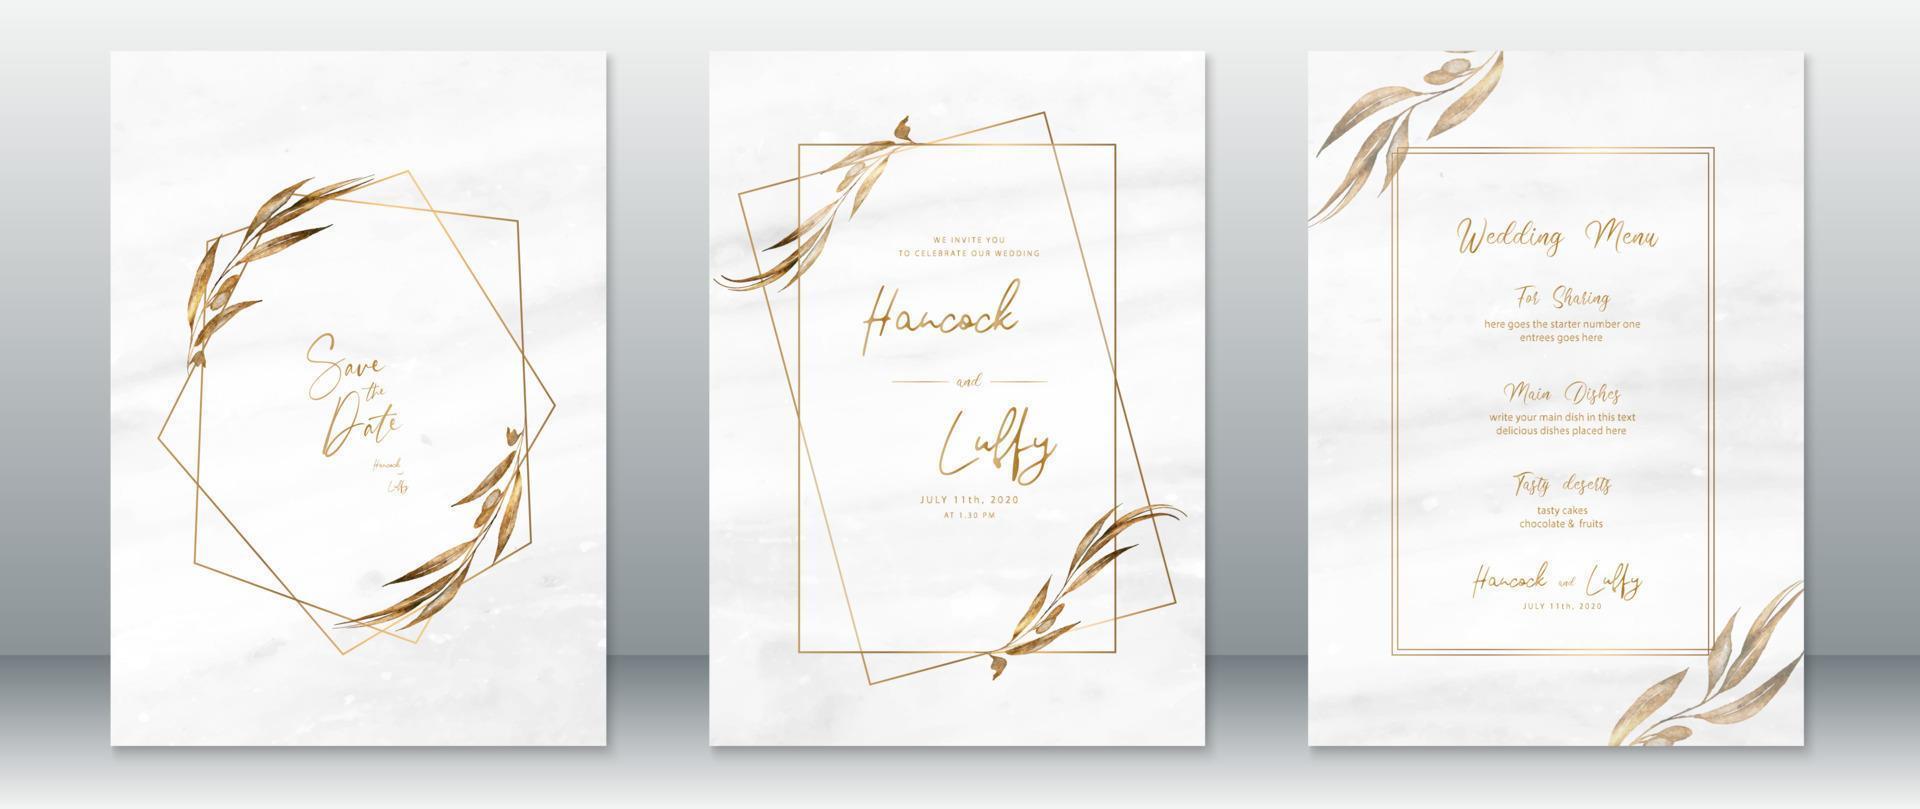 Luxury wedding invitation card template with white marble background vector